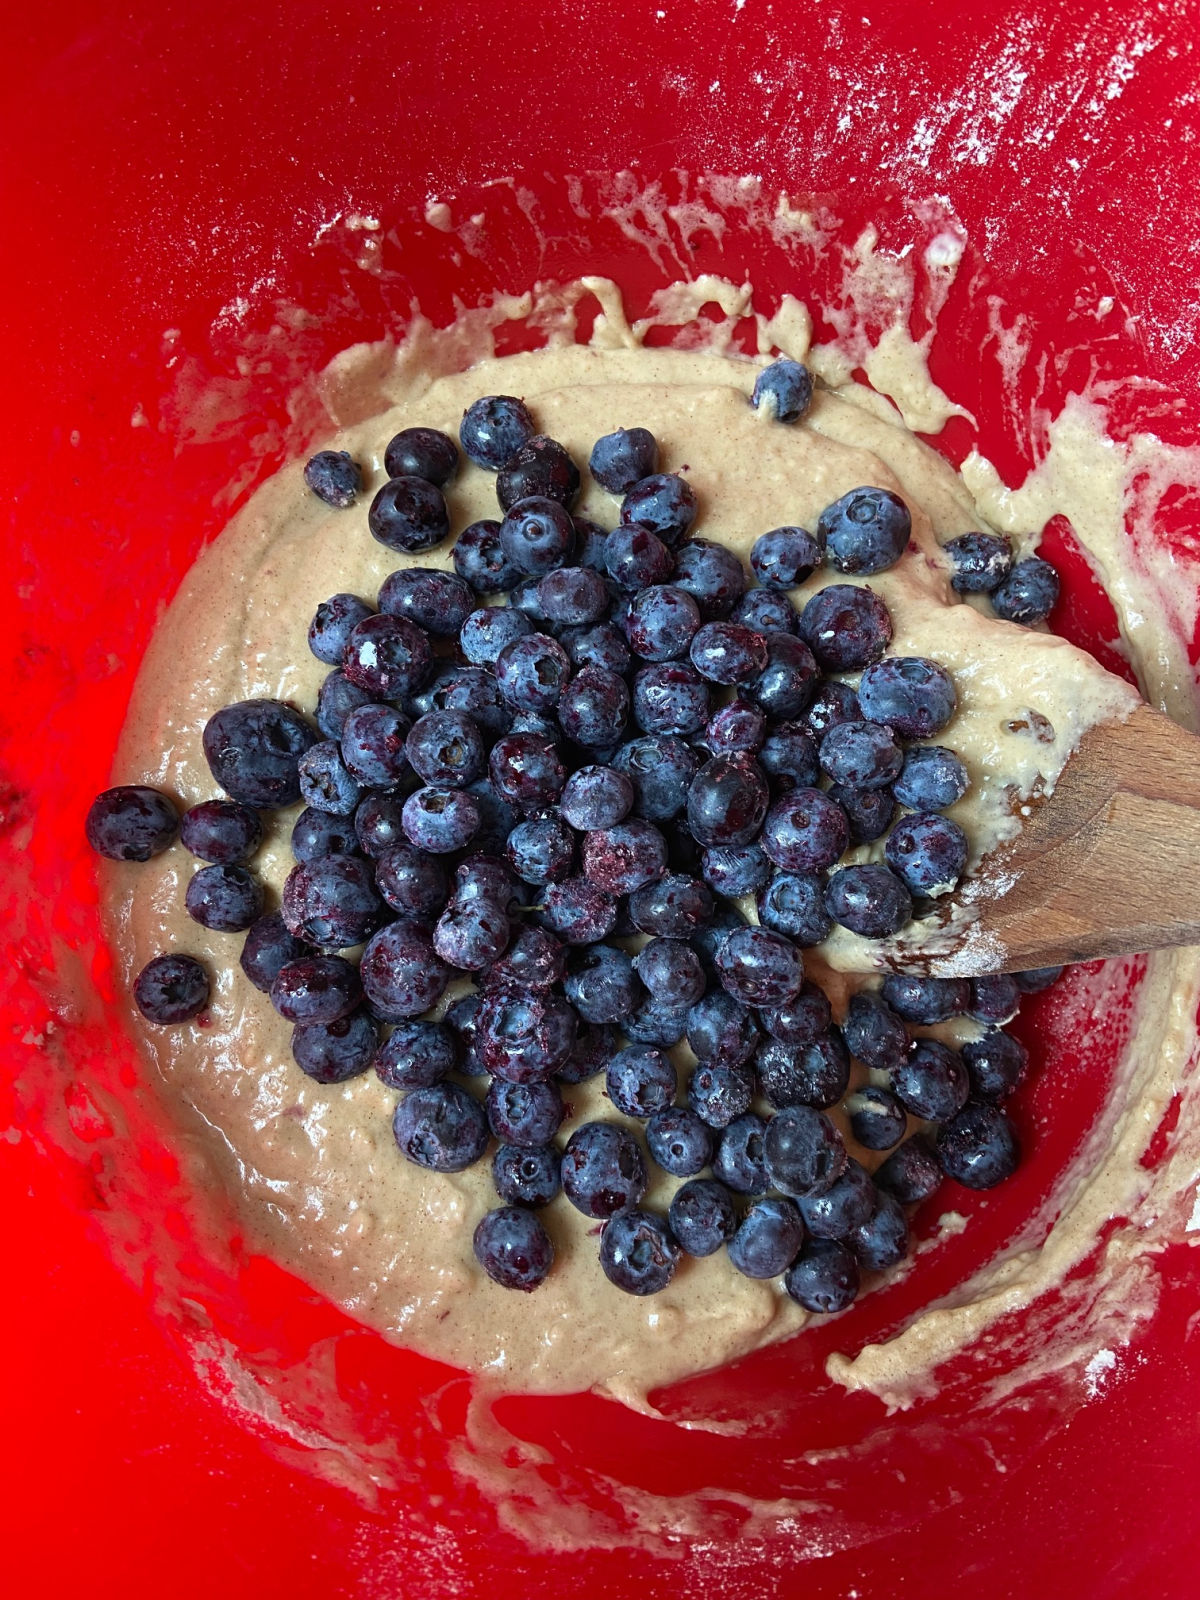 Muffin batter in a red bowl with blueberries. 